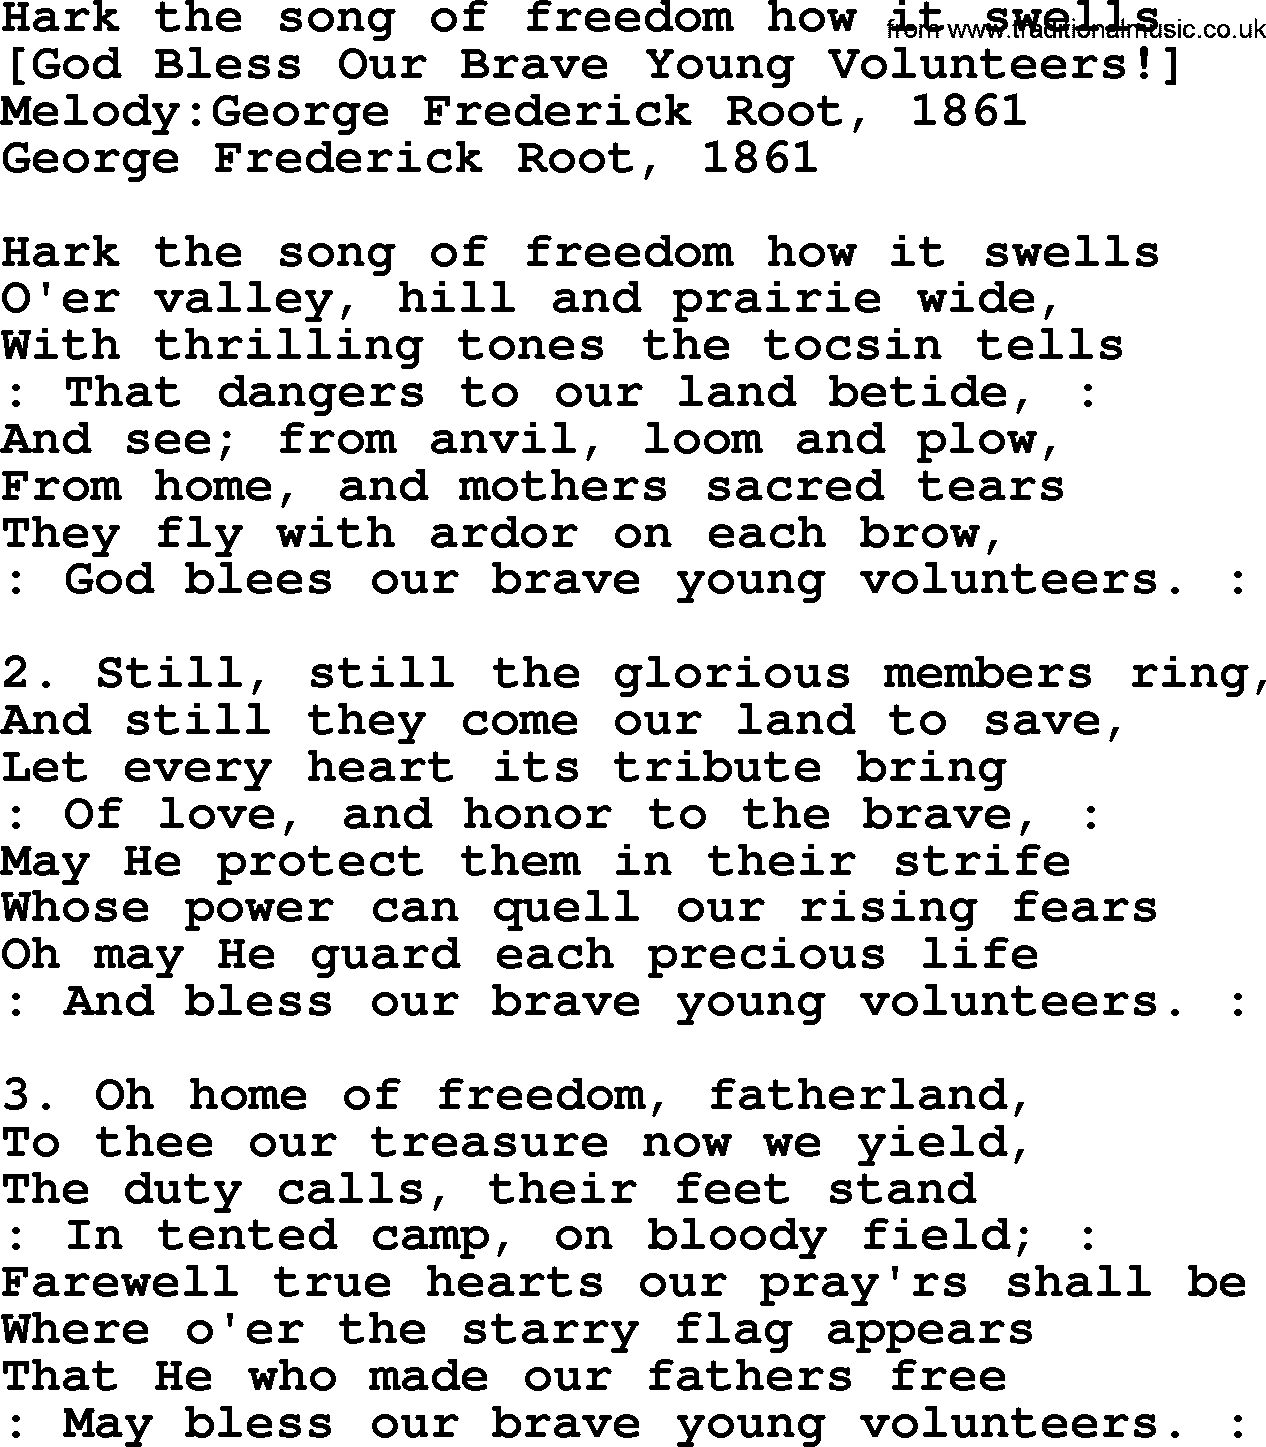 Old American Song: Hark The Song Of Freedom How It Swells, lyrics